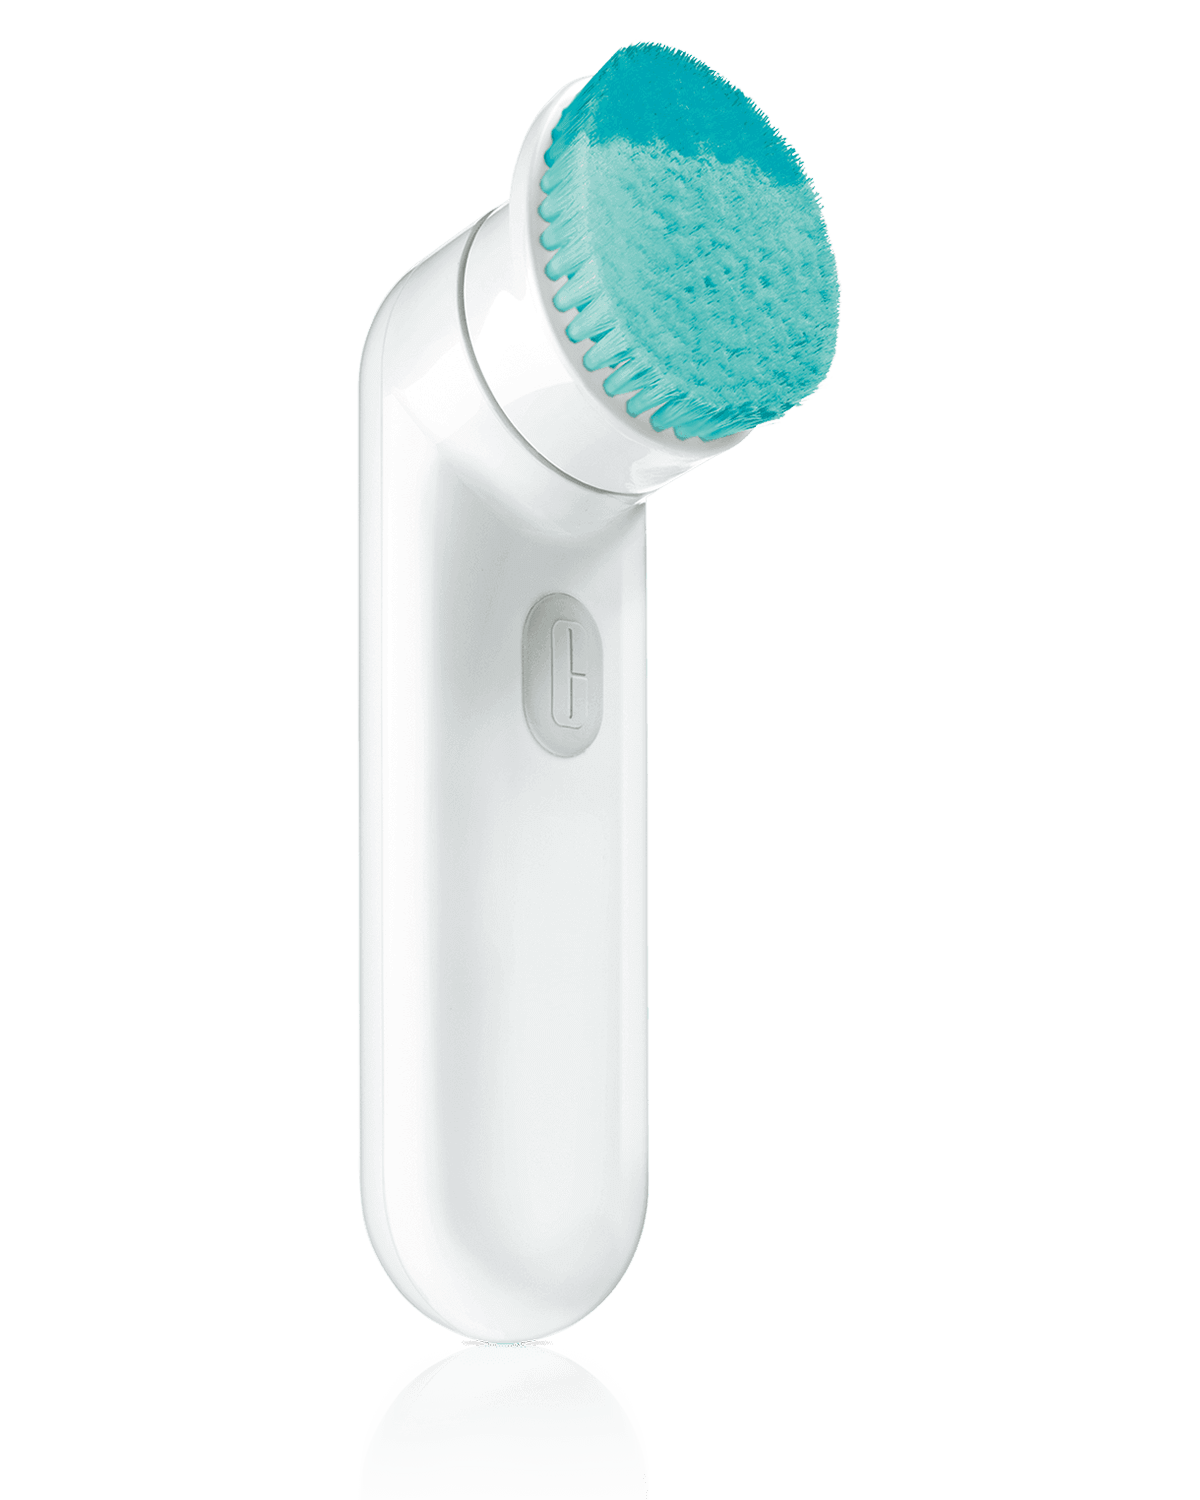 Clinique Sonic System Acne Cleansing Brush